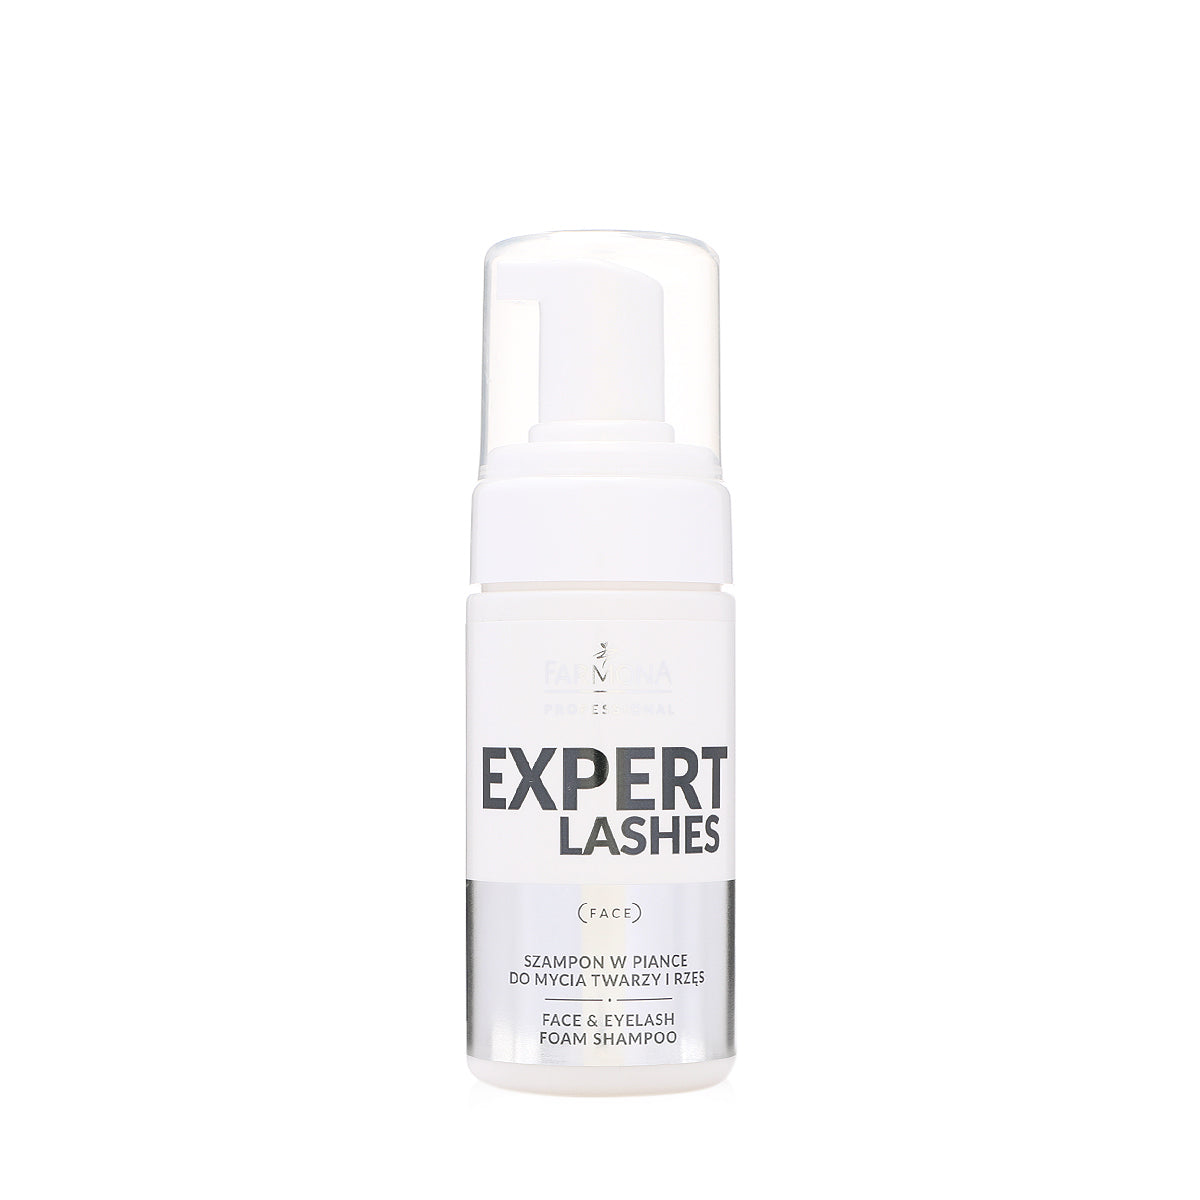 EXPERT LASHES Face cleansing foam 150ml